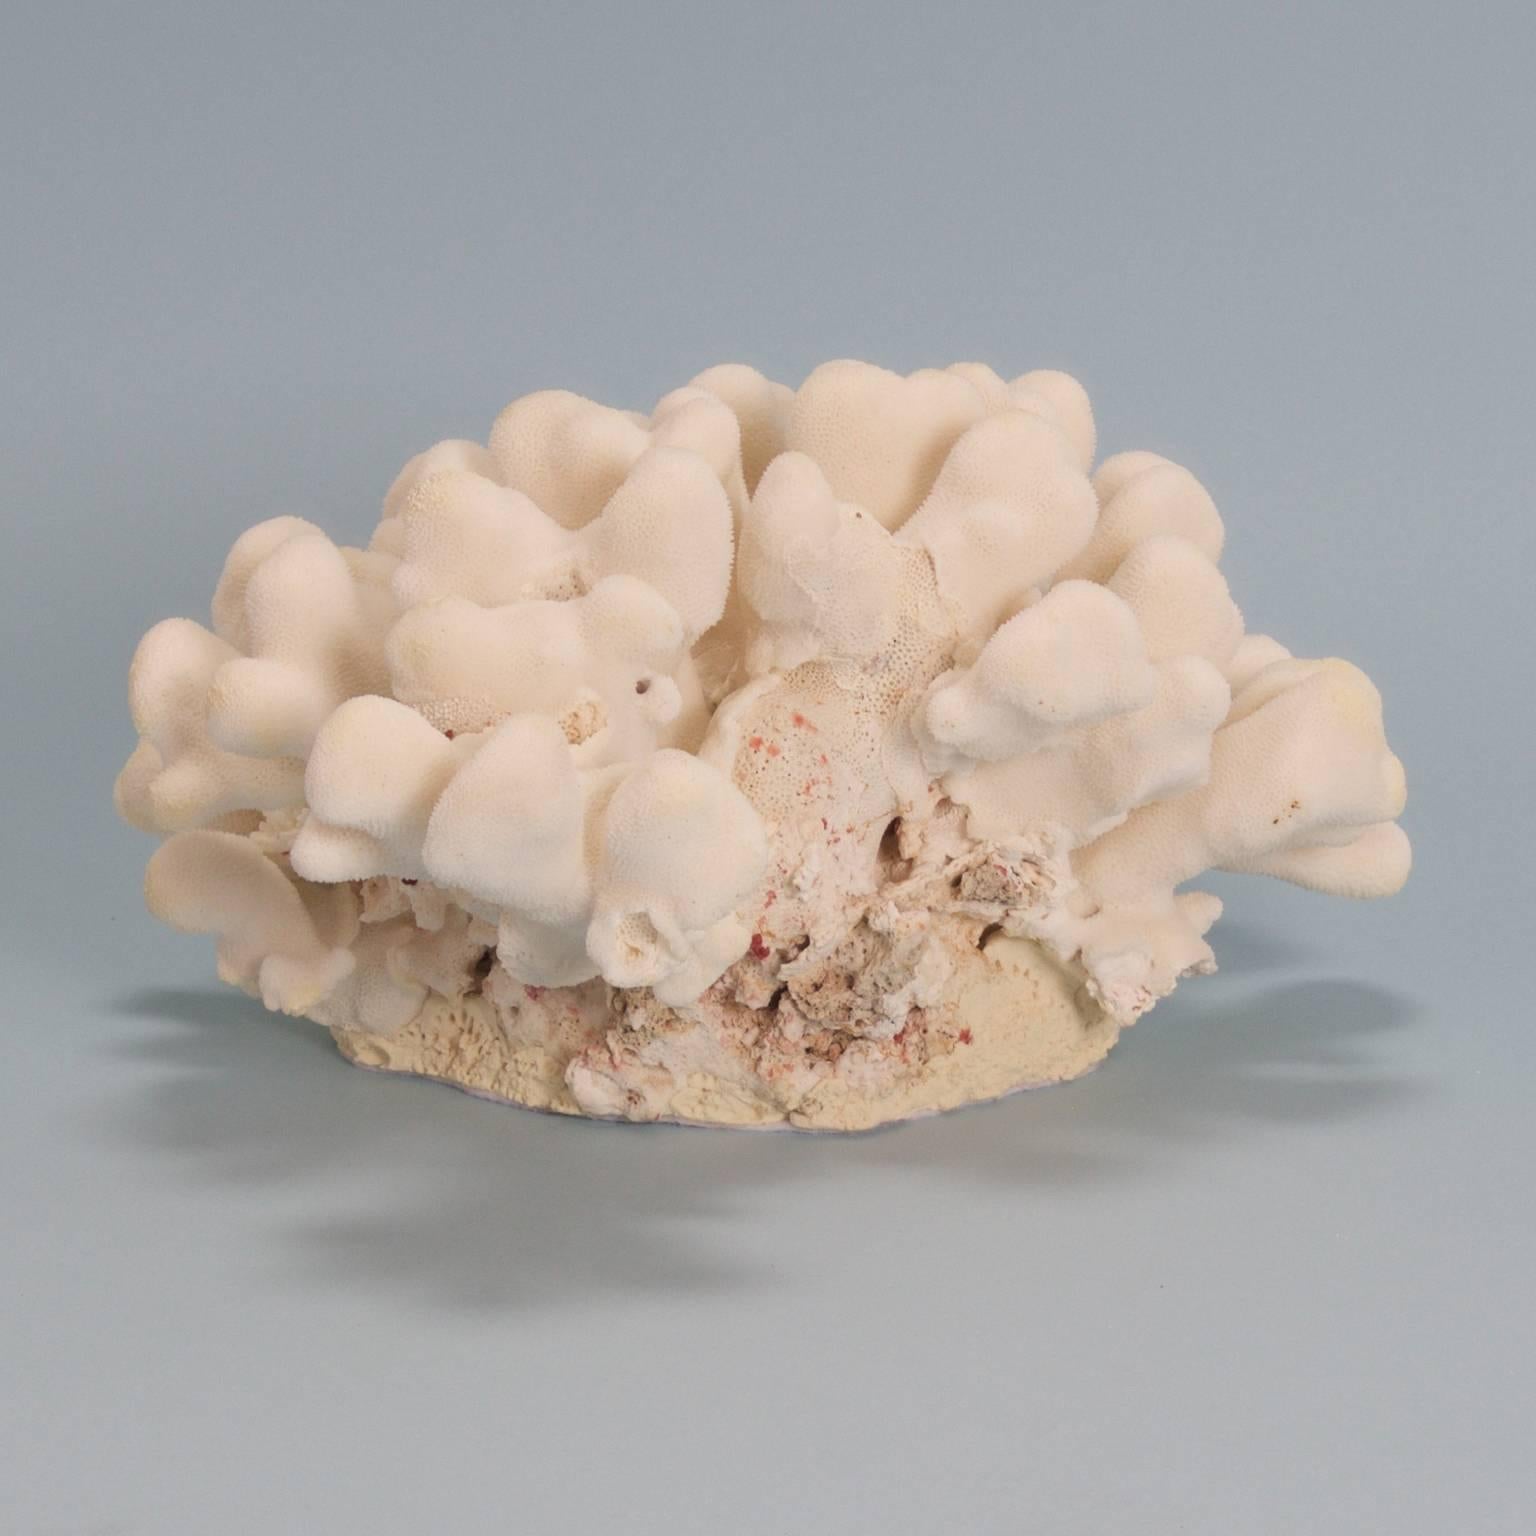 Custom made Elkhorn Pacific coral sculpture with an unusual form. Designed and crafted by F.S. Henemader. Bring mother nature's inspiration to any style interior. 

This piece cannot be shipped out of the US, without expensive extra expenditures for